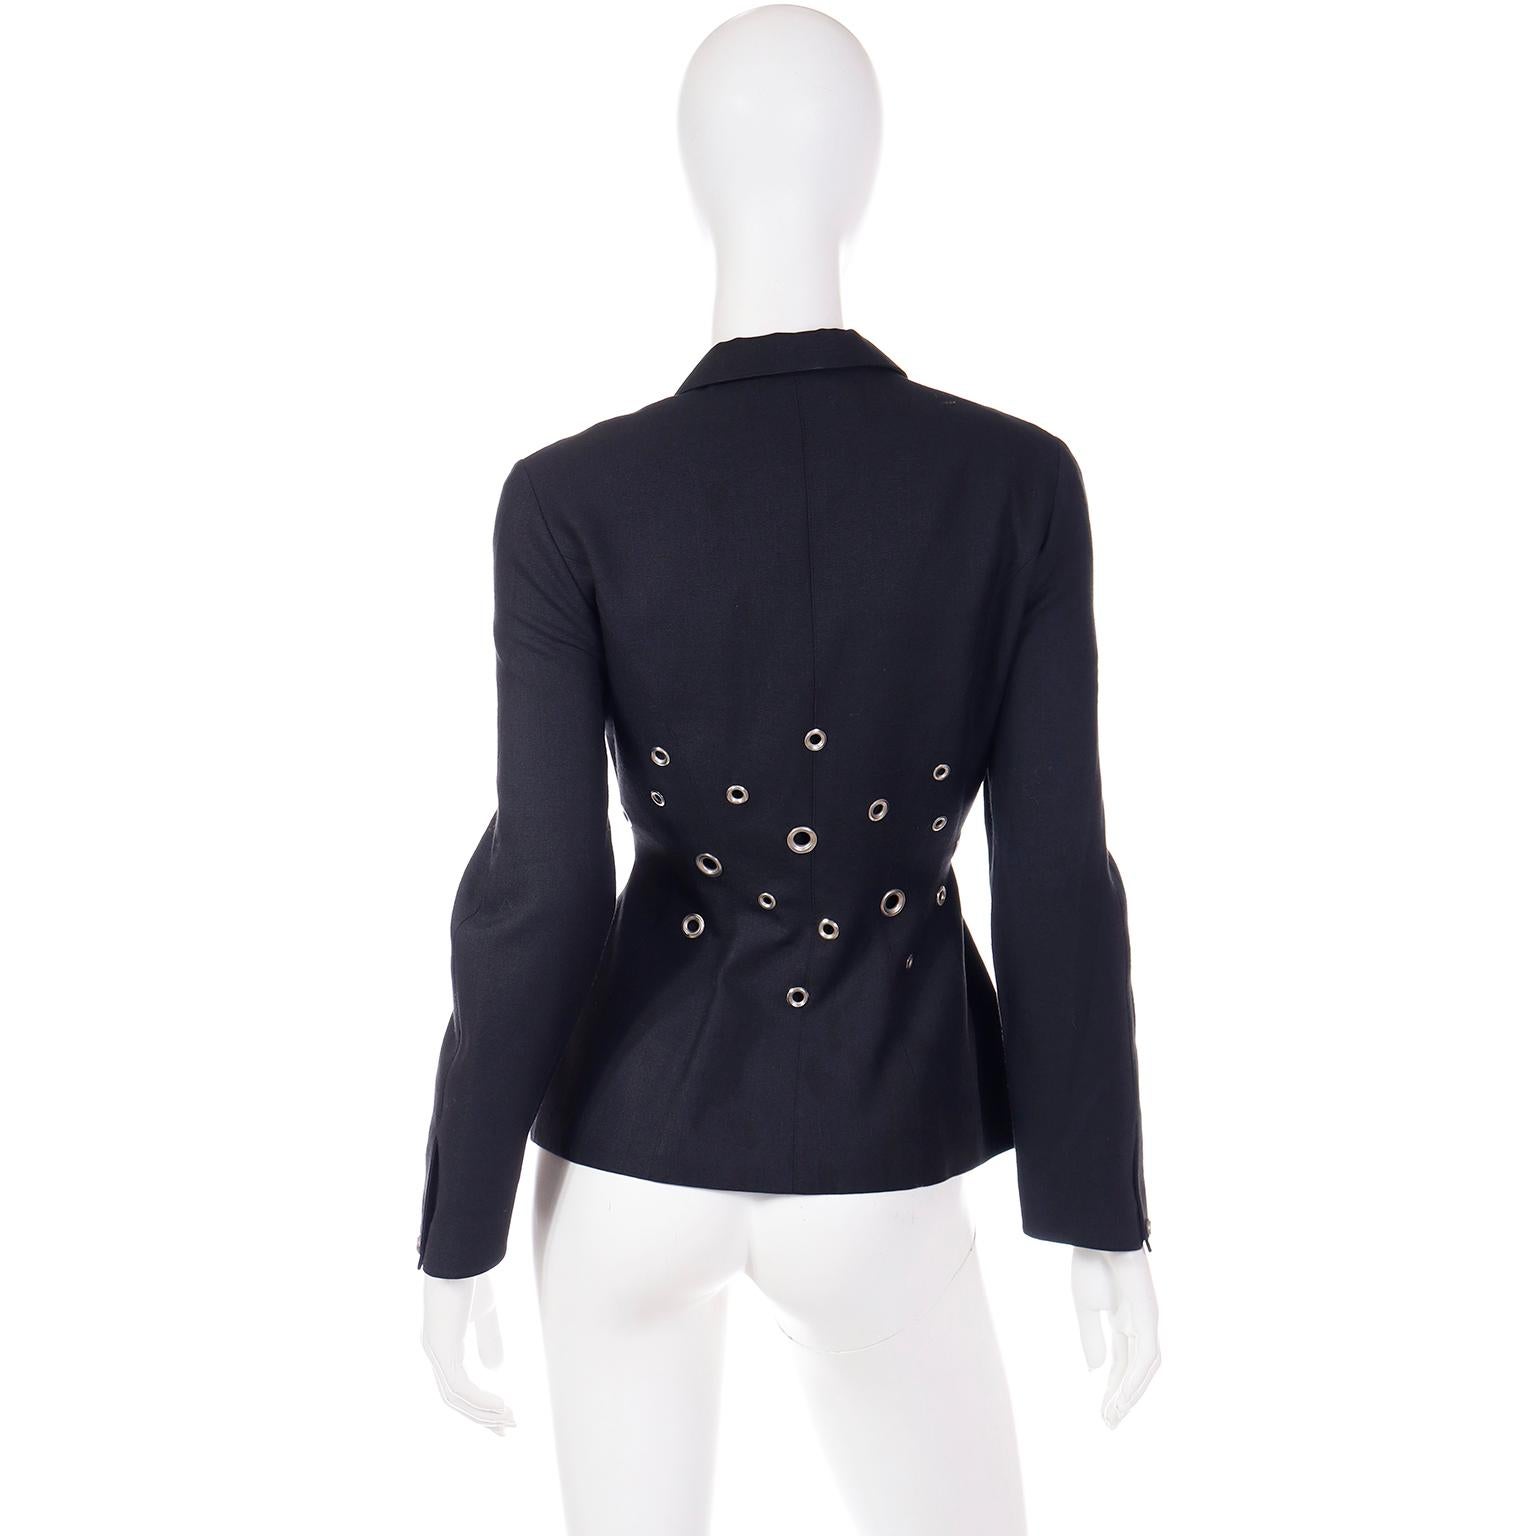 Thierry Mugler Paris Vintage Grey Black Jacket With Silver Grommets 1